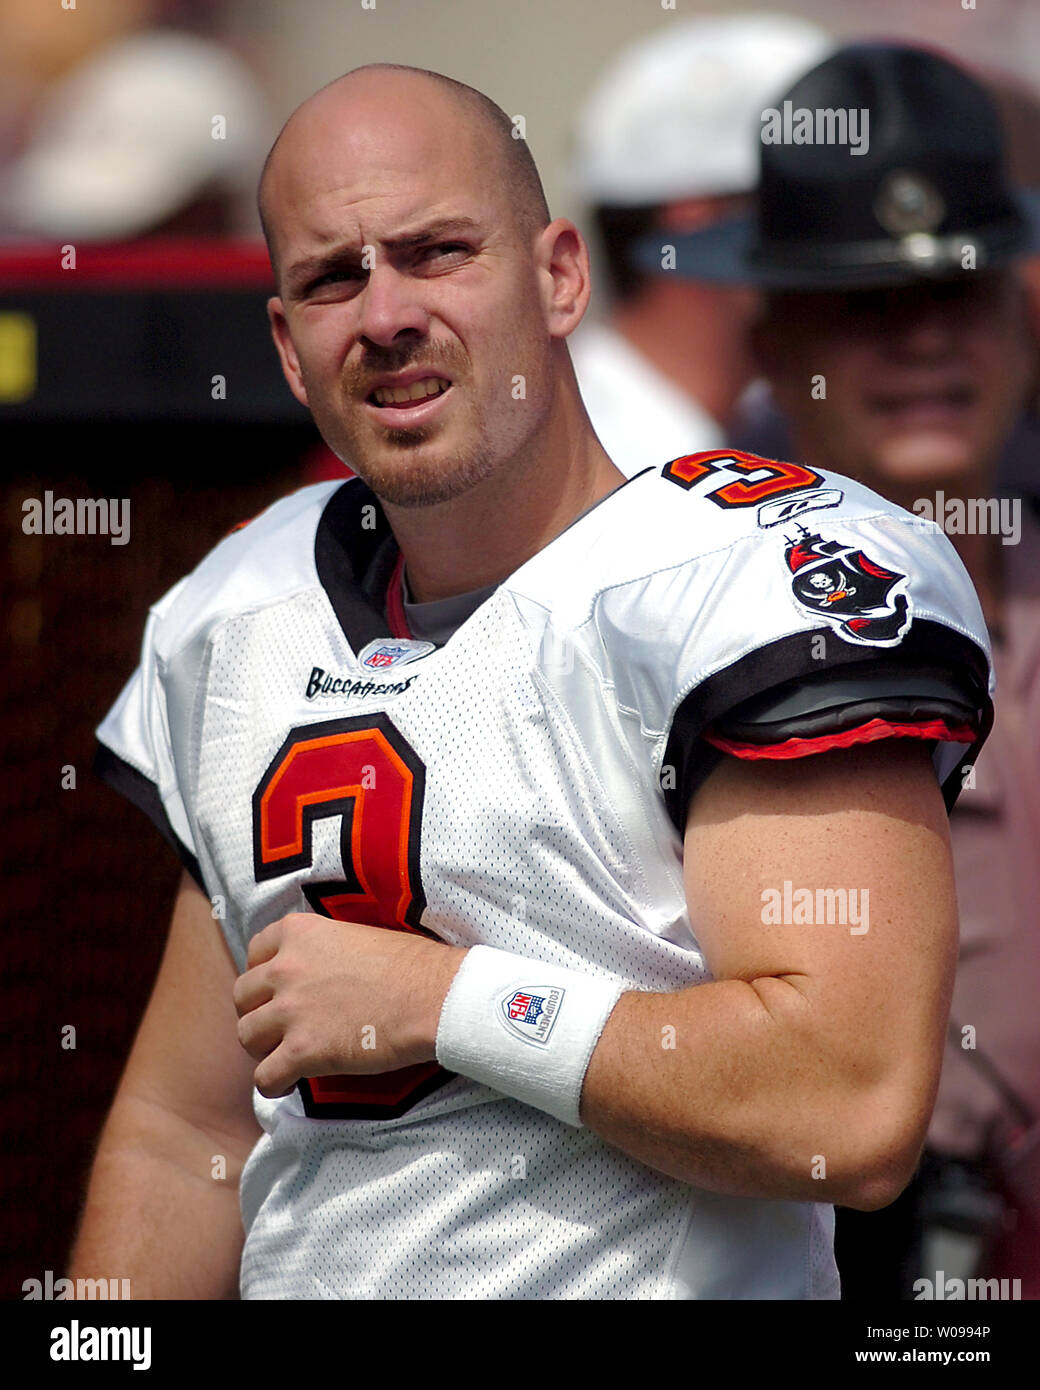 Tampa Bay Buccaneers' Matt Bryant glances at the scoreboard during a game  against the Cincinnati Bengals at Raymond James Stadium in Tampa, Florida  October 15, 2006. The Buccaneers beat the Bengals 14-13. (